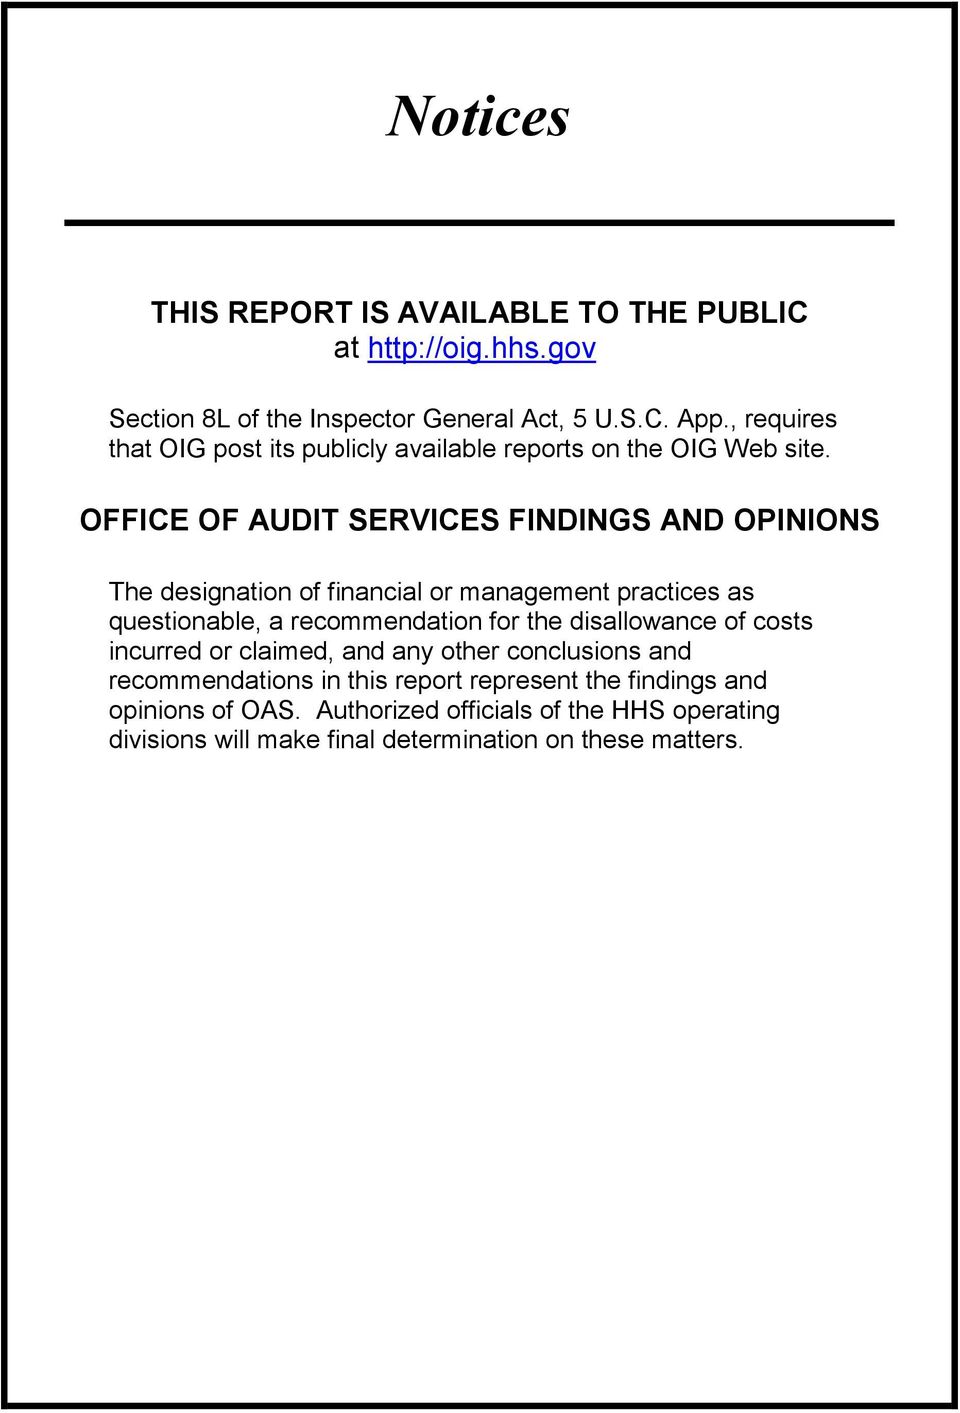 OFFICE OF AUDIT SERVICES FINDINGS AND OPINIONS The designation of financial or management practices as questionable, a recommendation for the